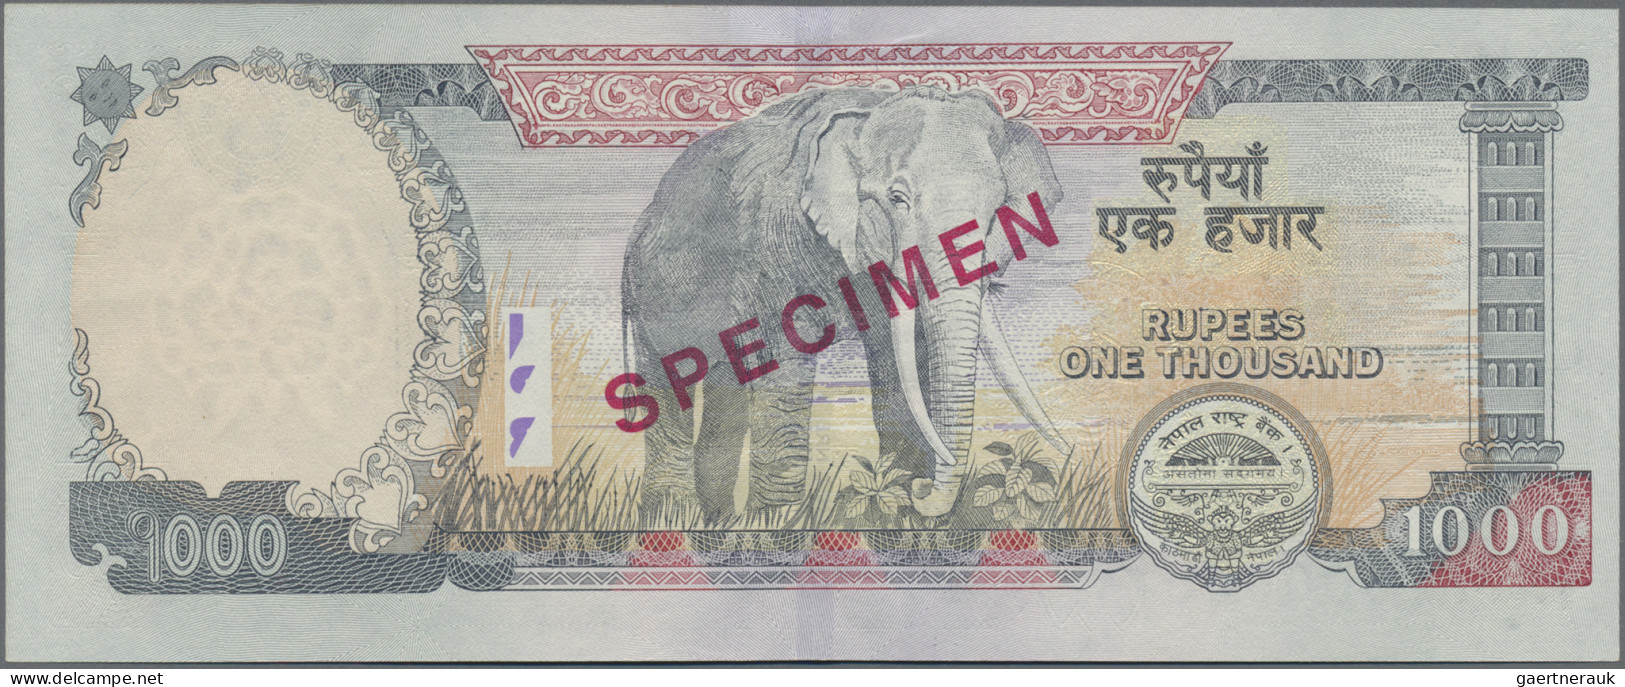 Nepal: Nepal Rastra Bank, 1.000 Rupees ND(2010) SPECIMEN, P.68as With Signature: - Népal